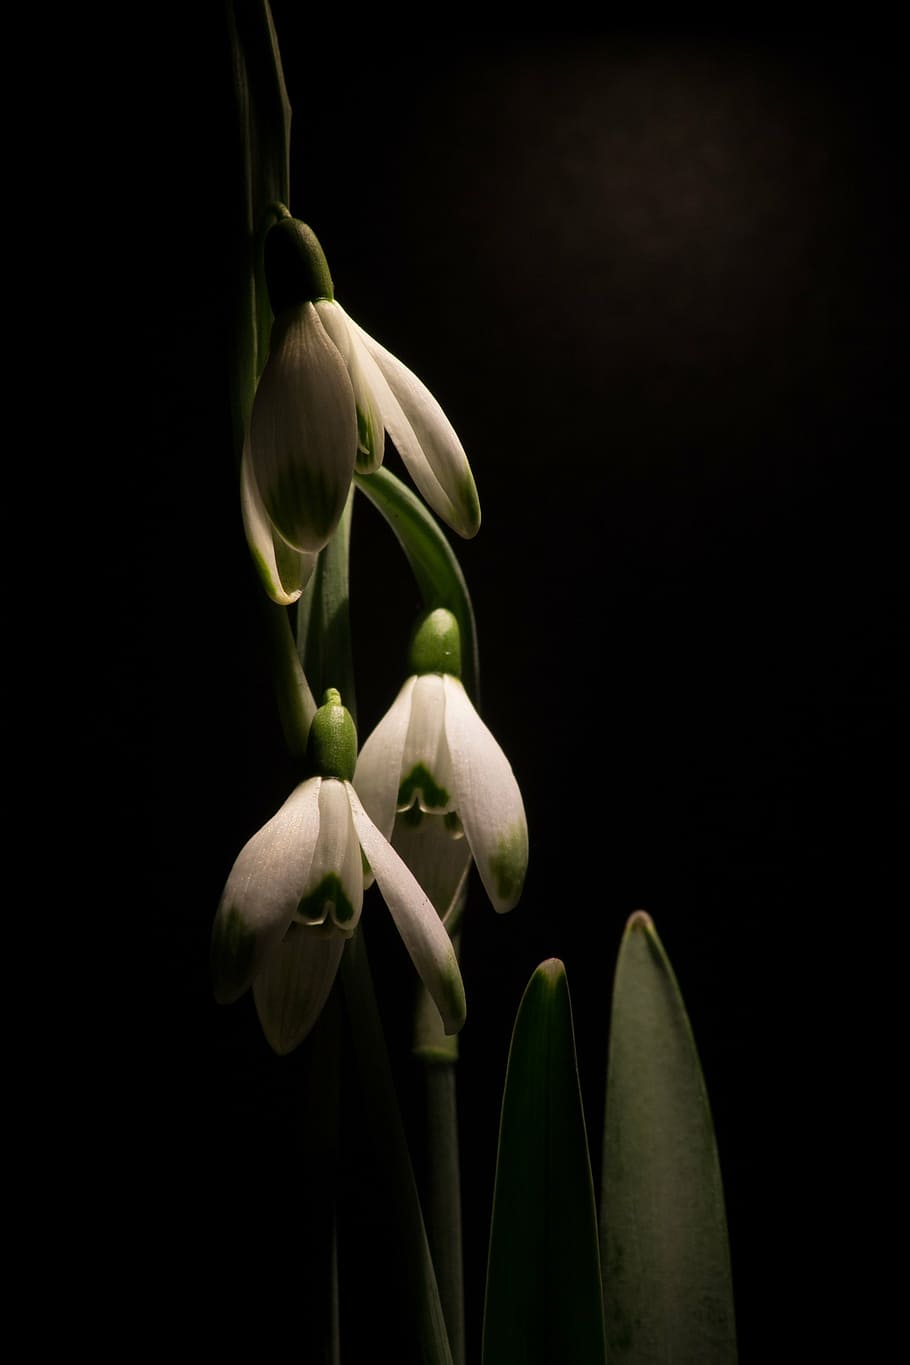 snowdrop, macro, white flowers, spring, plant, flower, flowering plant, beauty in nature, growth, studio shot